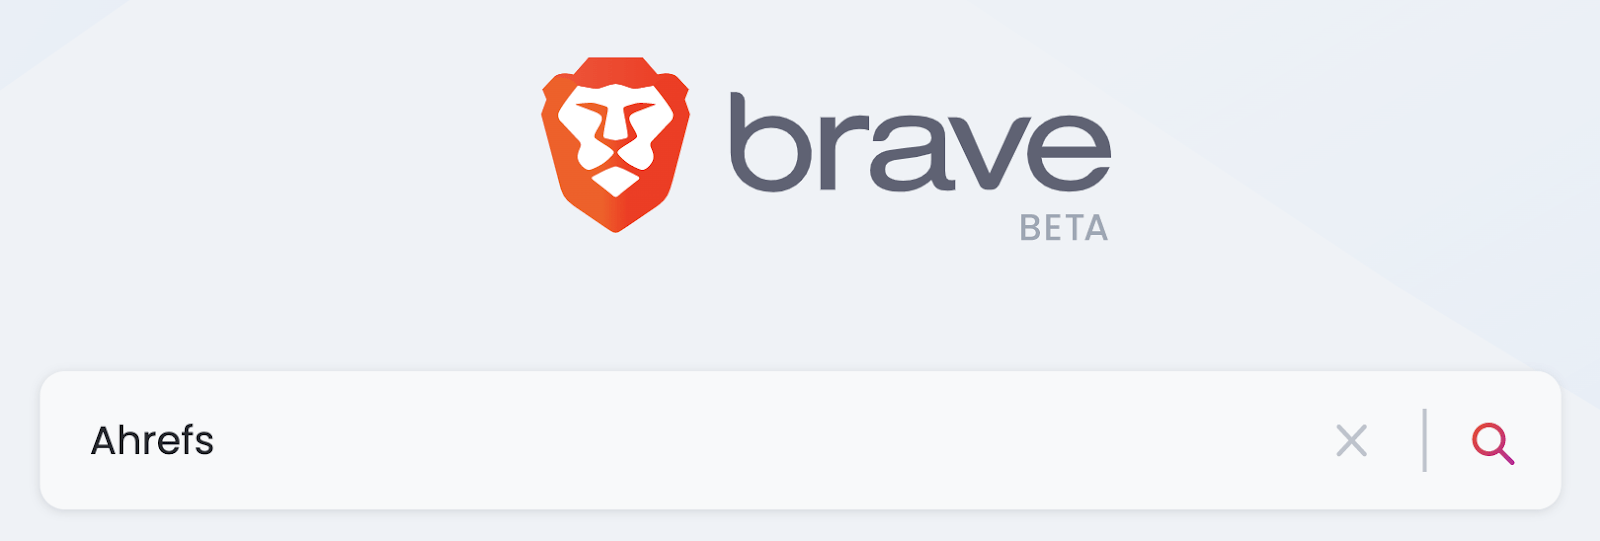 Brave's homepage. Search term "Ahrefs" in text field